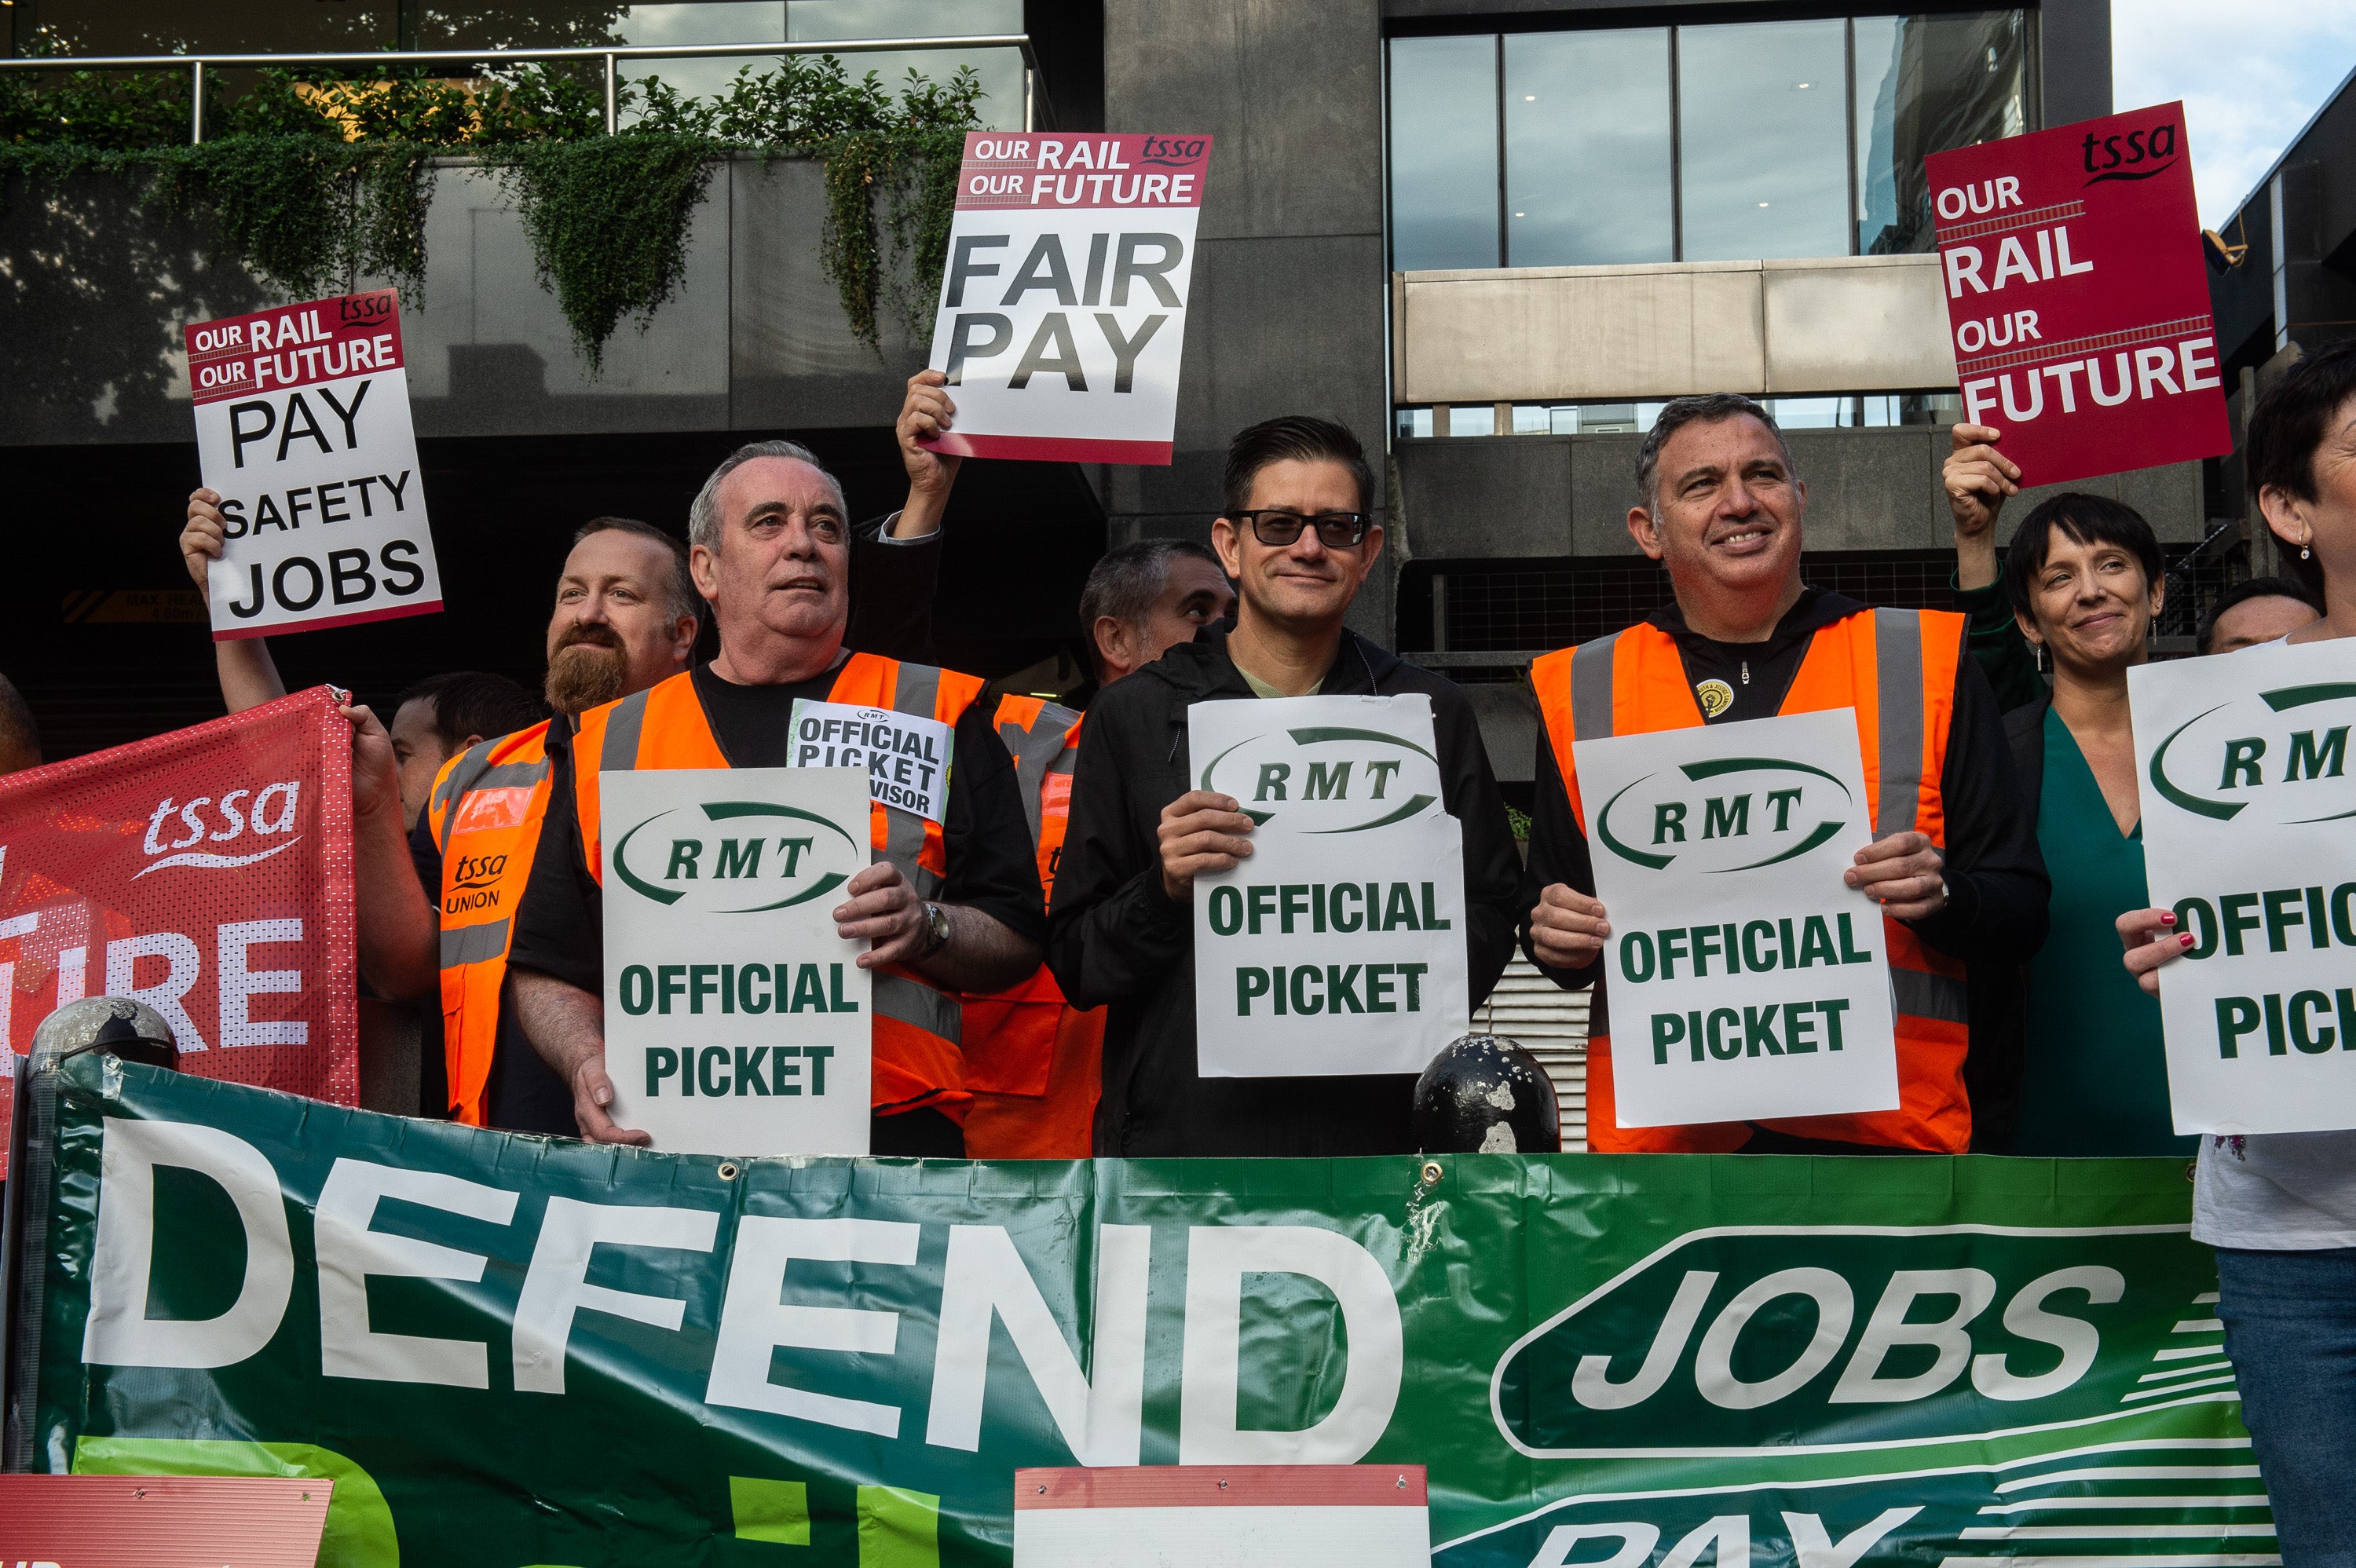 Striking members of the RMT and TSSA trade unions joined the picket line at Euston station on Wednesday